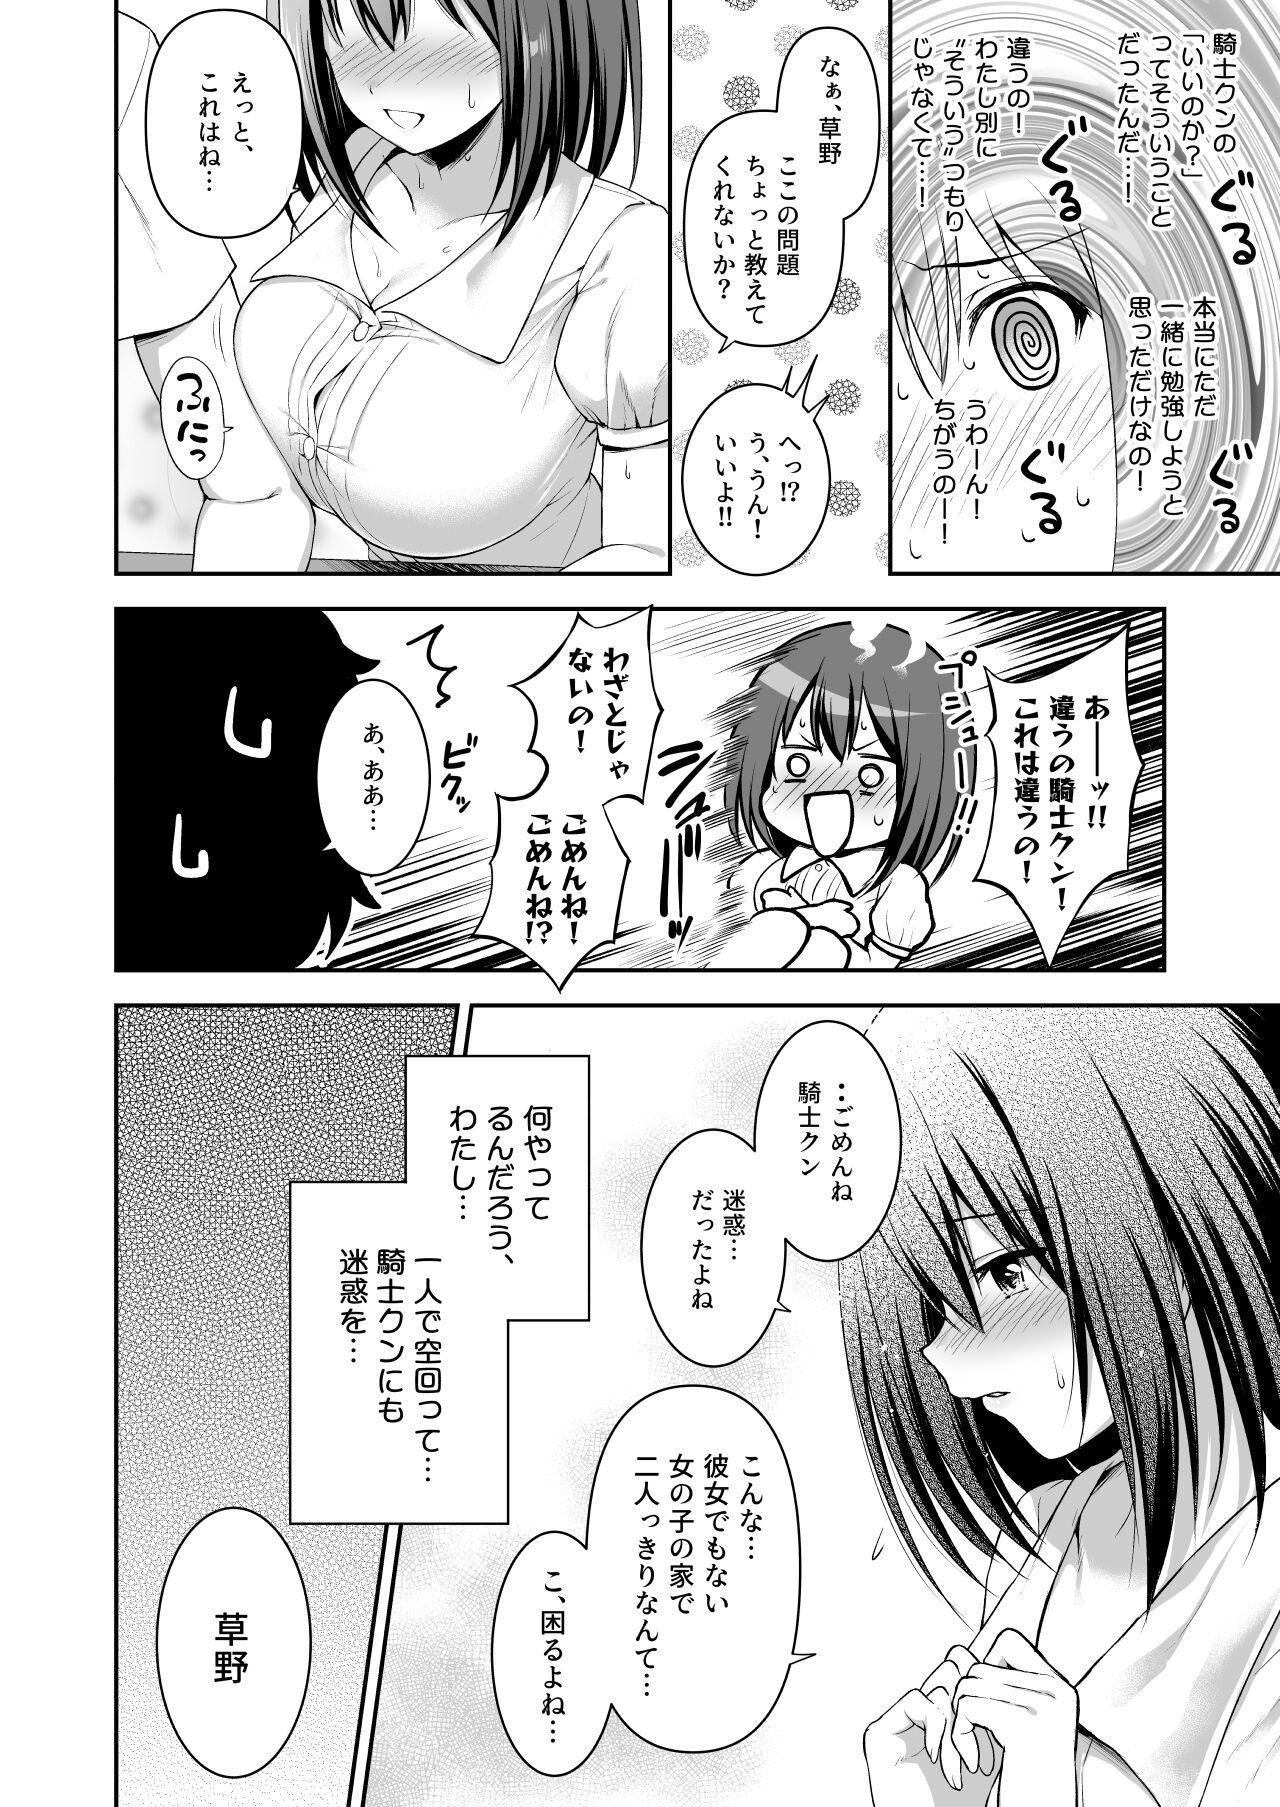 The 優衣コネ - Princess connect Spa - Page 10